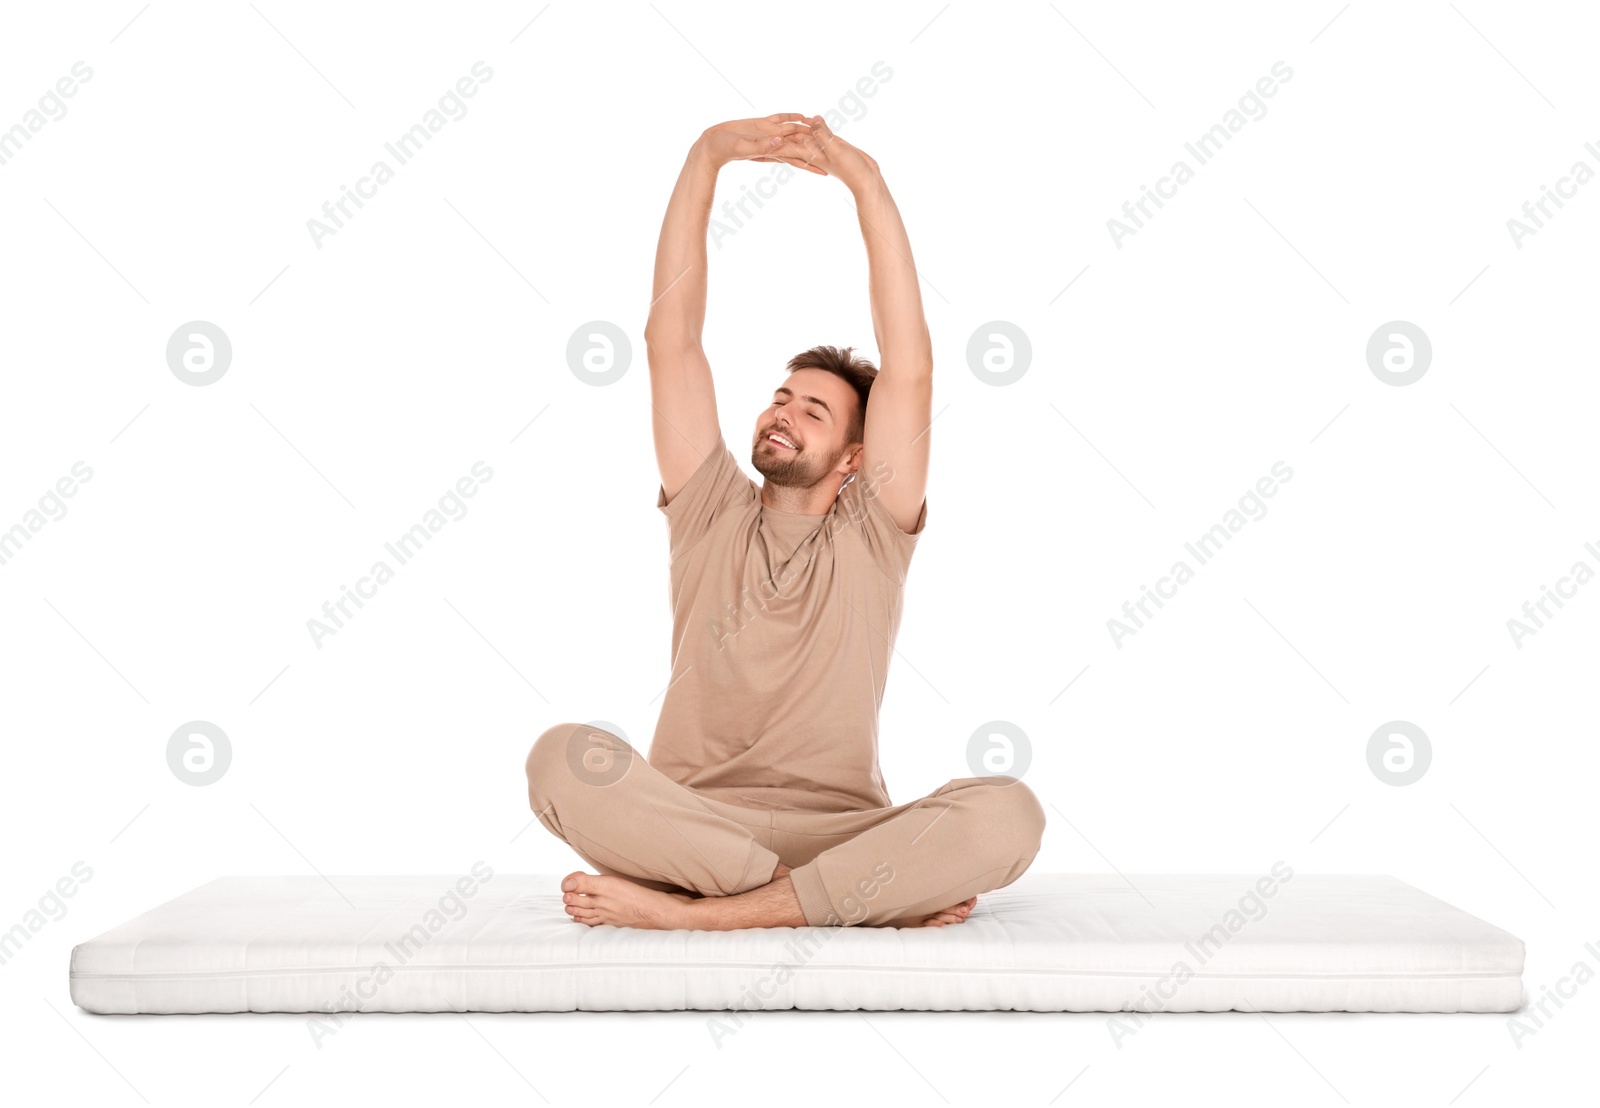 Photo of Man stretching on soft mattress against white background